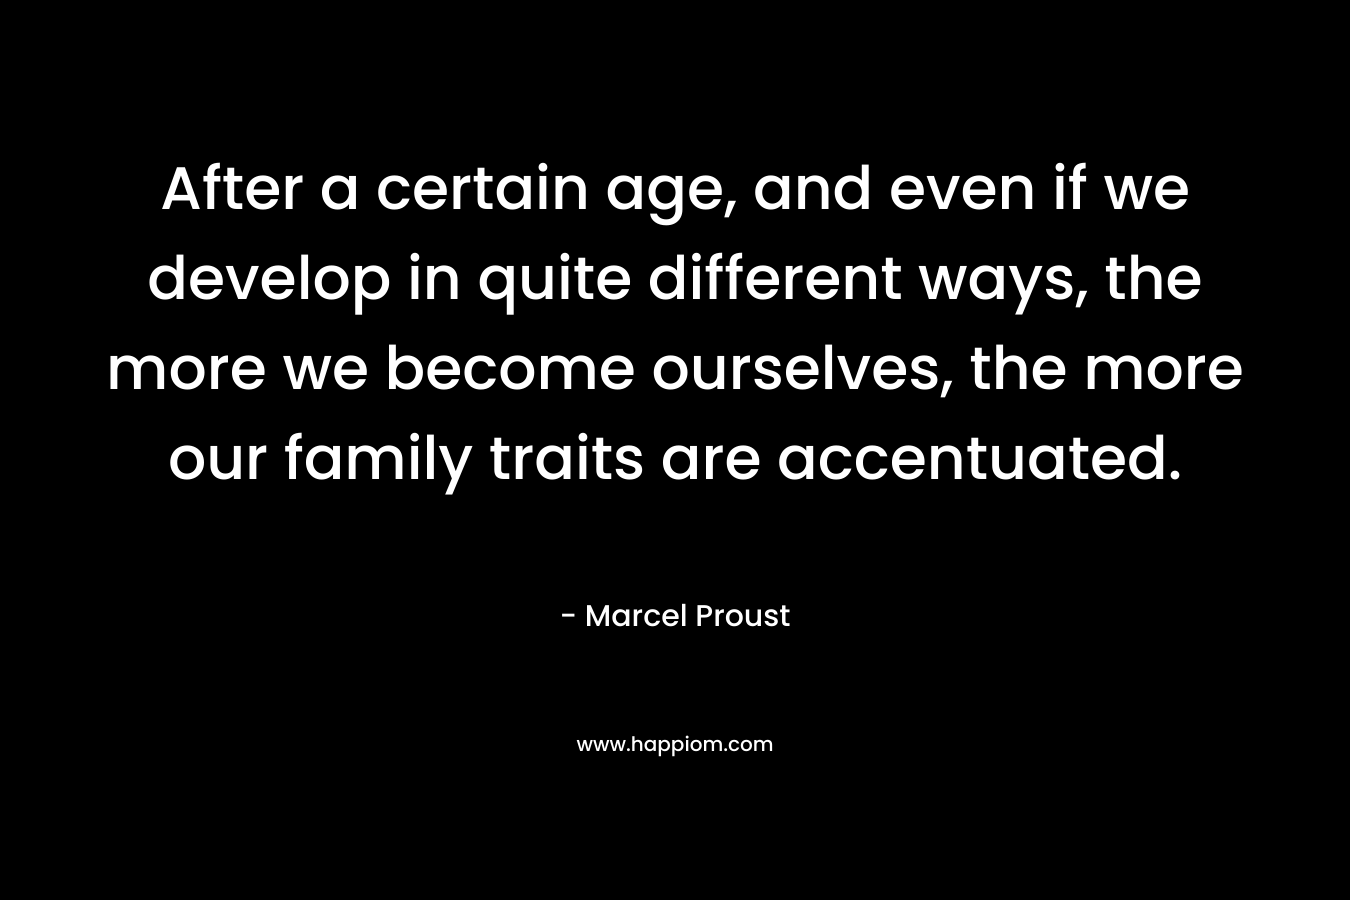 After a certain age, and even if we develop in quite different ways, the more we become ourselves, the more our family traits are accentuated.